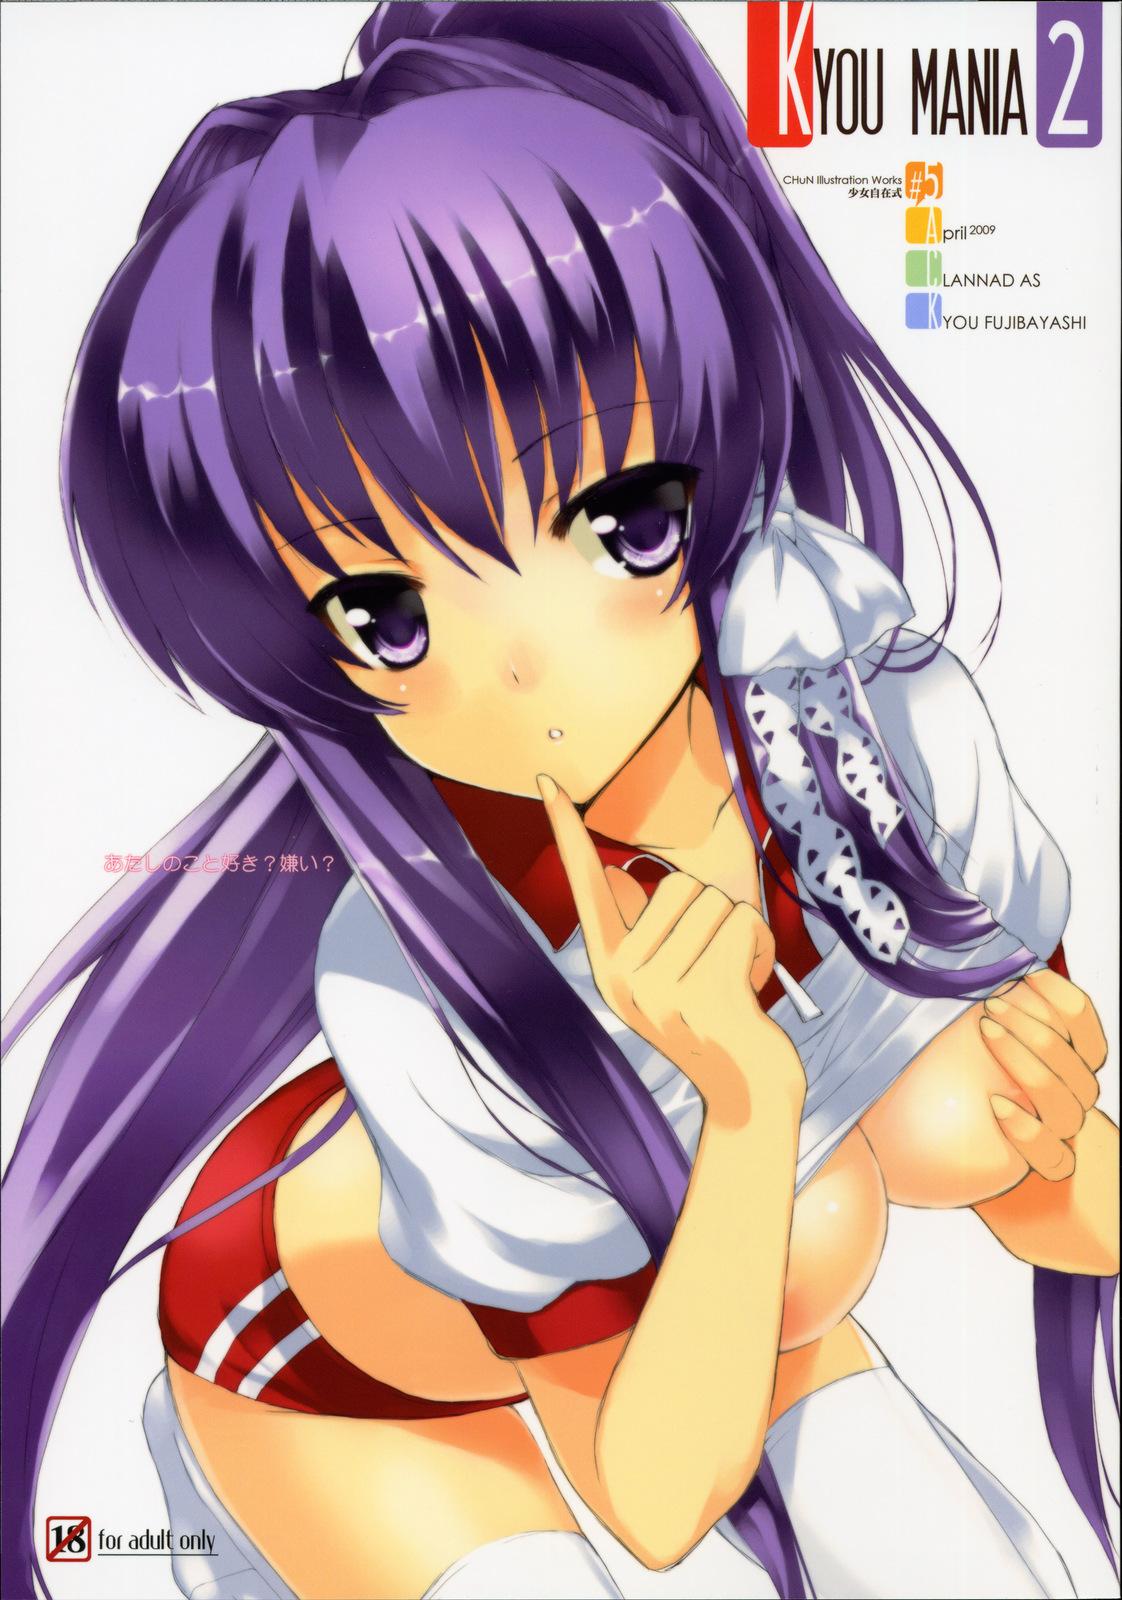 Love Making KYOU MANIA 2 - Clannad Colombia - Page 1